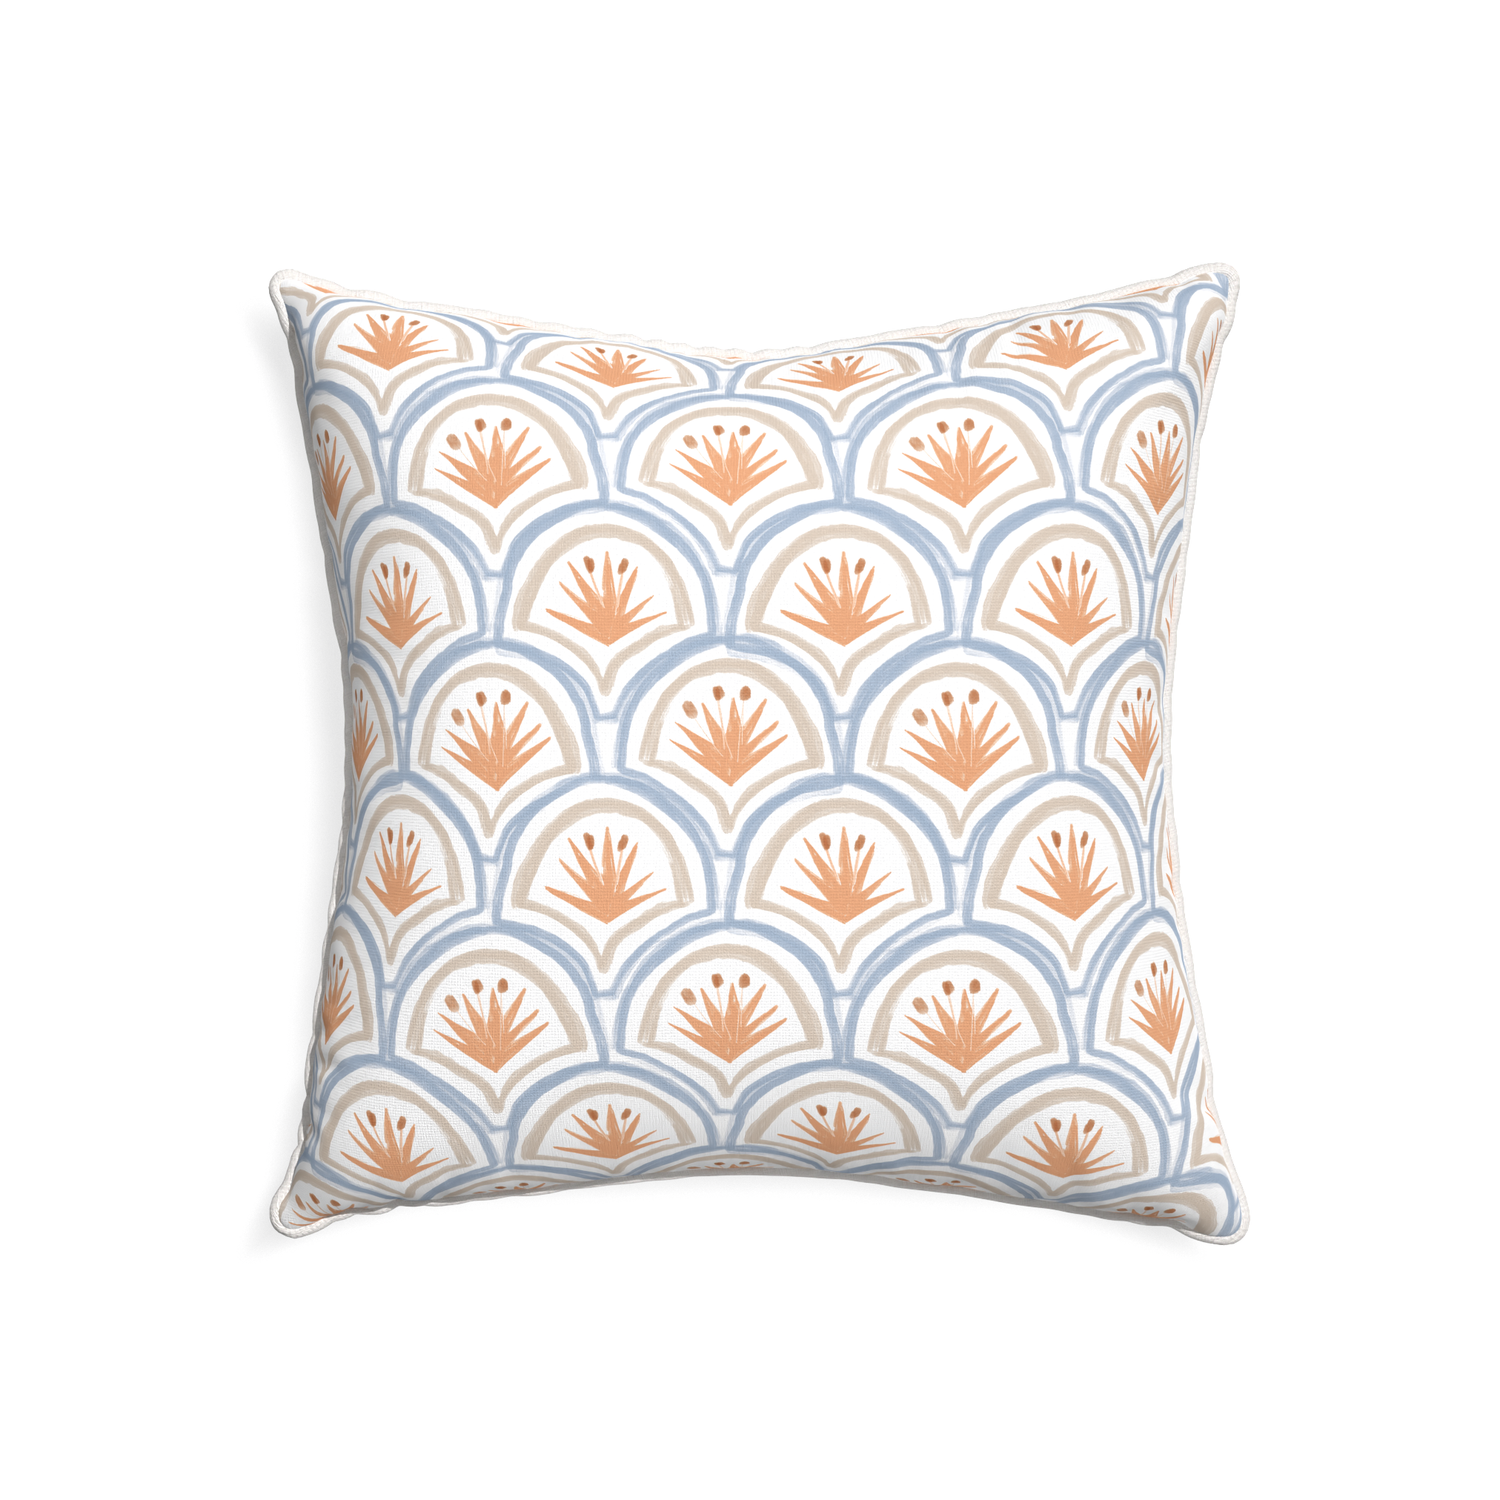 22-square thatcher apricot custom pillow with snow piping on white background